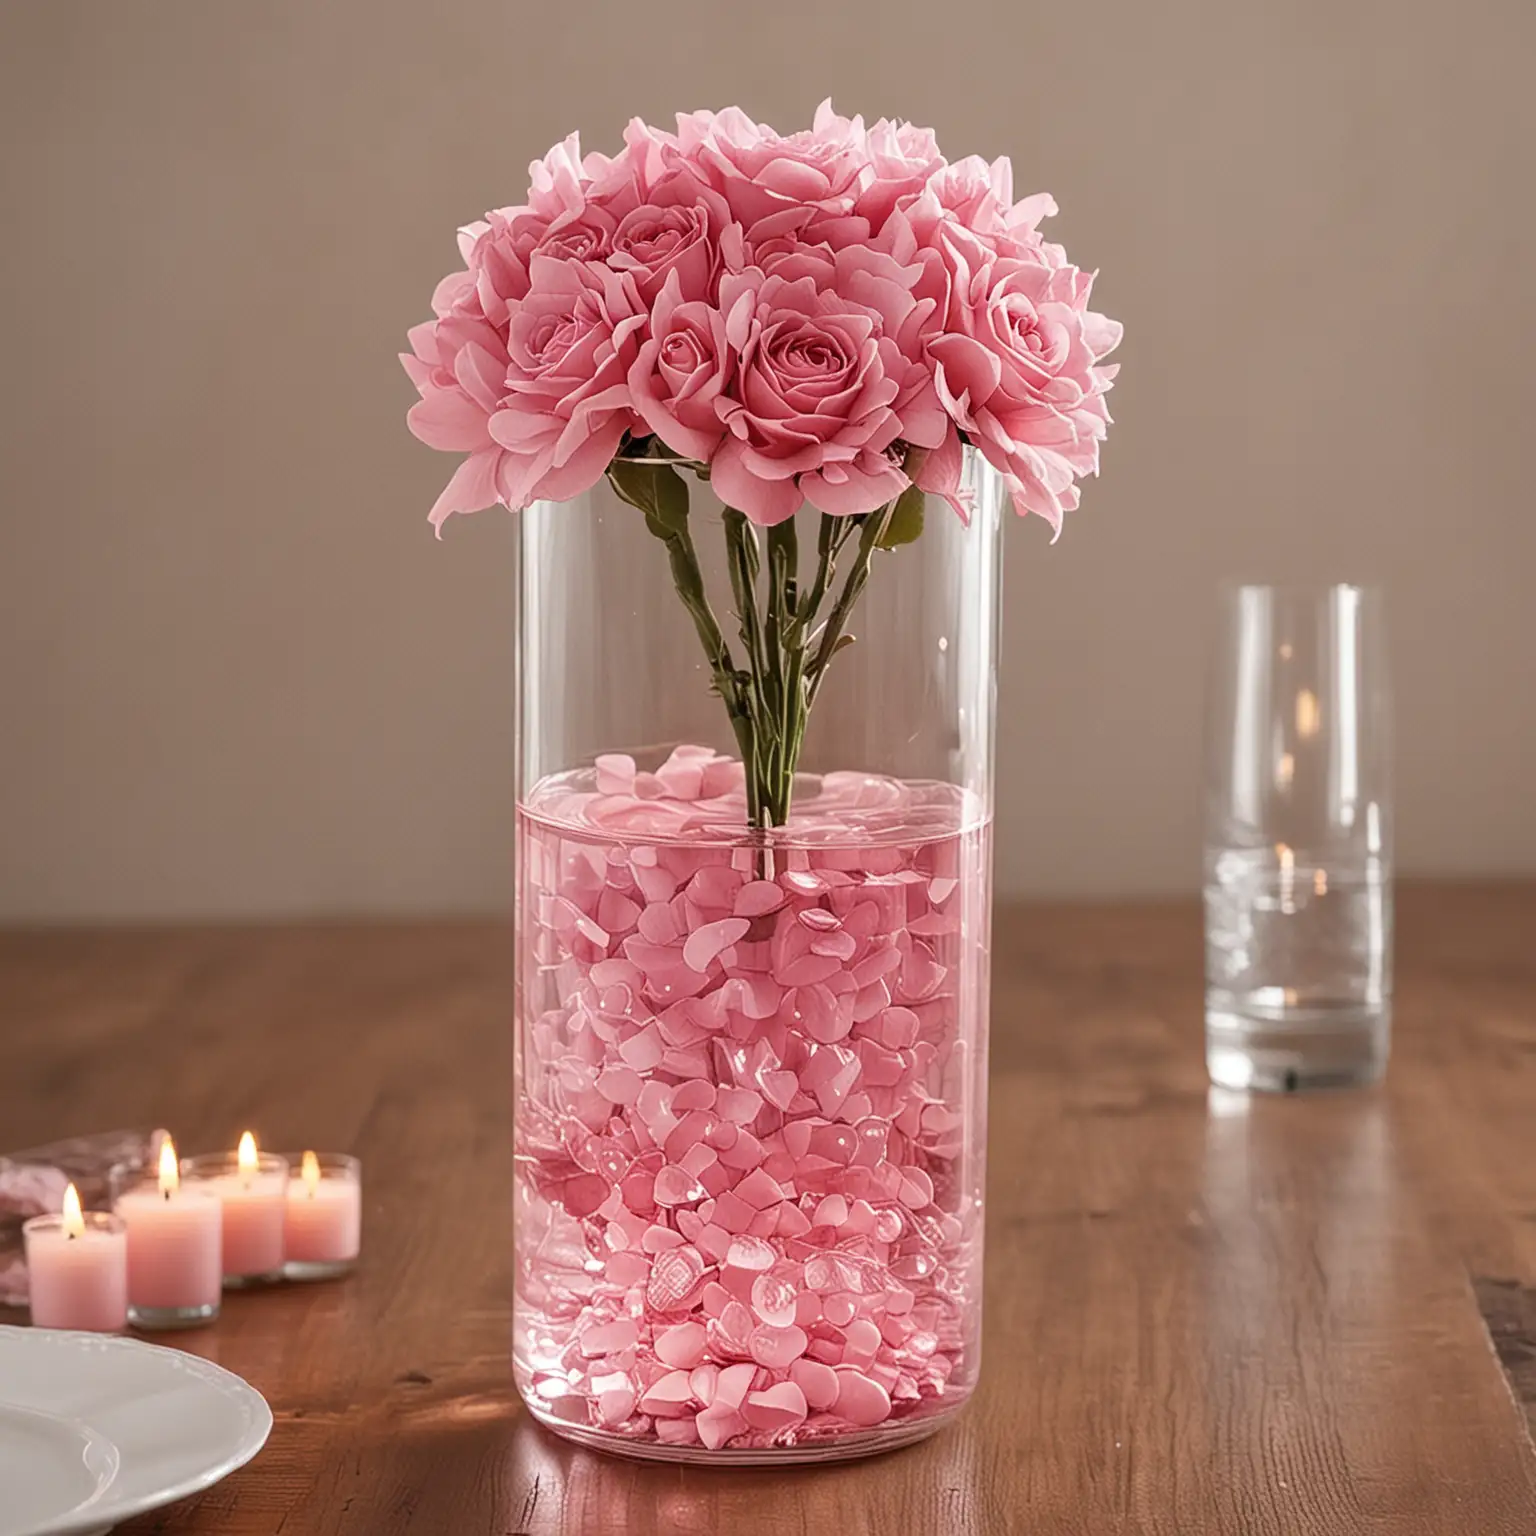 a simple DIY wedding centerpiece with a glass cylinder vase filled with pink colored water